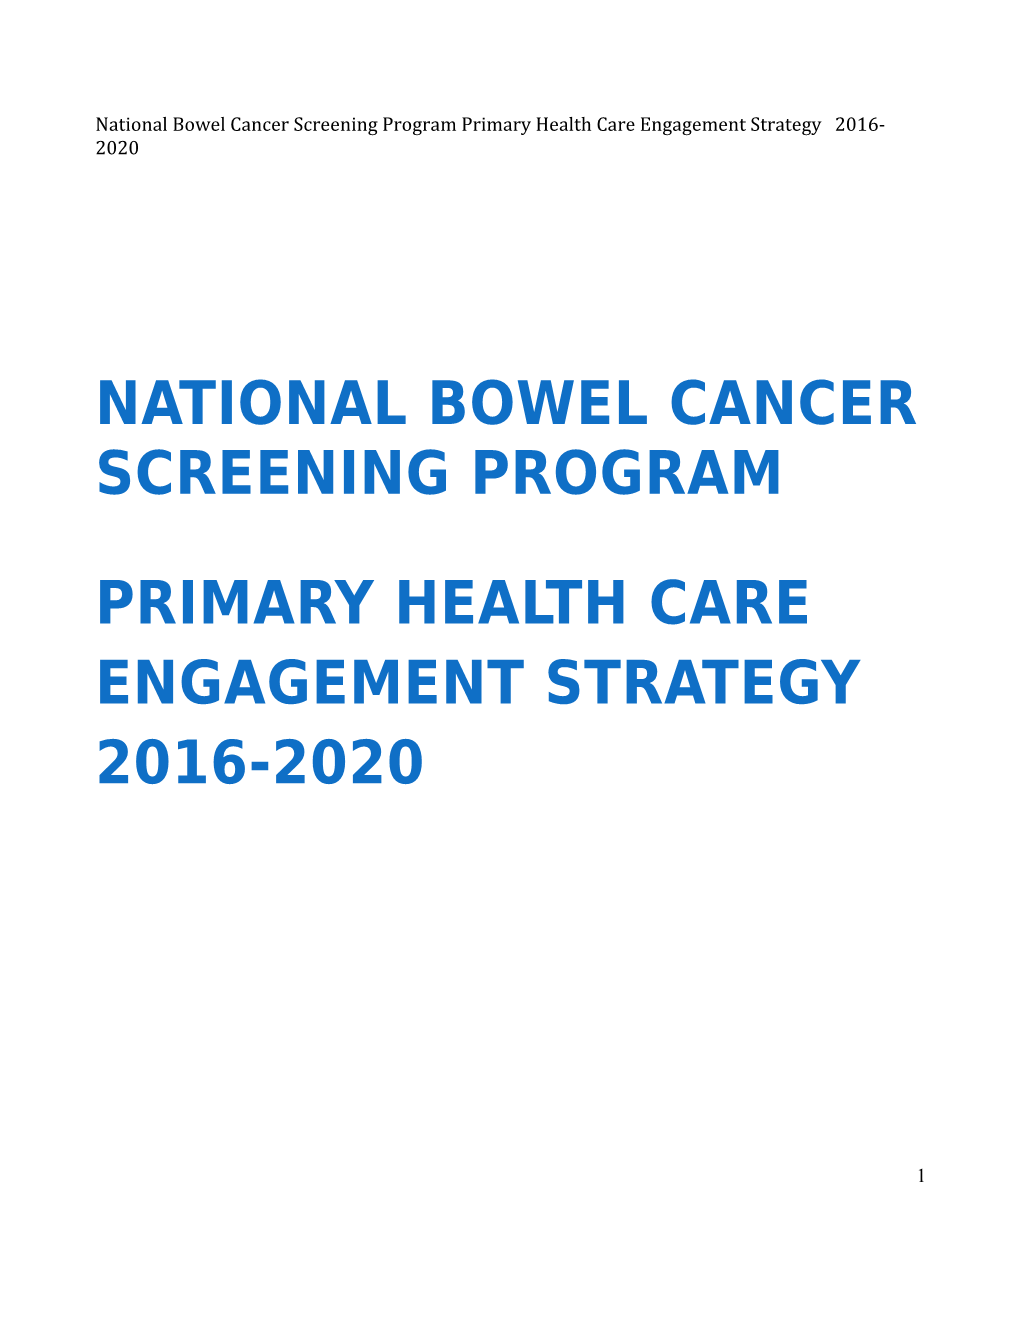 National Bowel Cancer Screening Program Primary Health Care Engagement Strategy 2016-2020